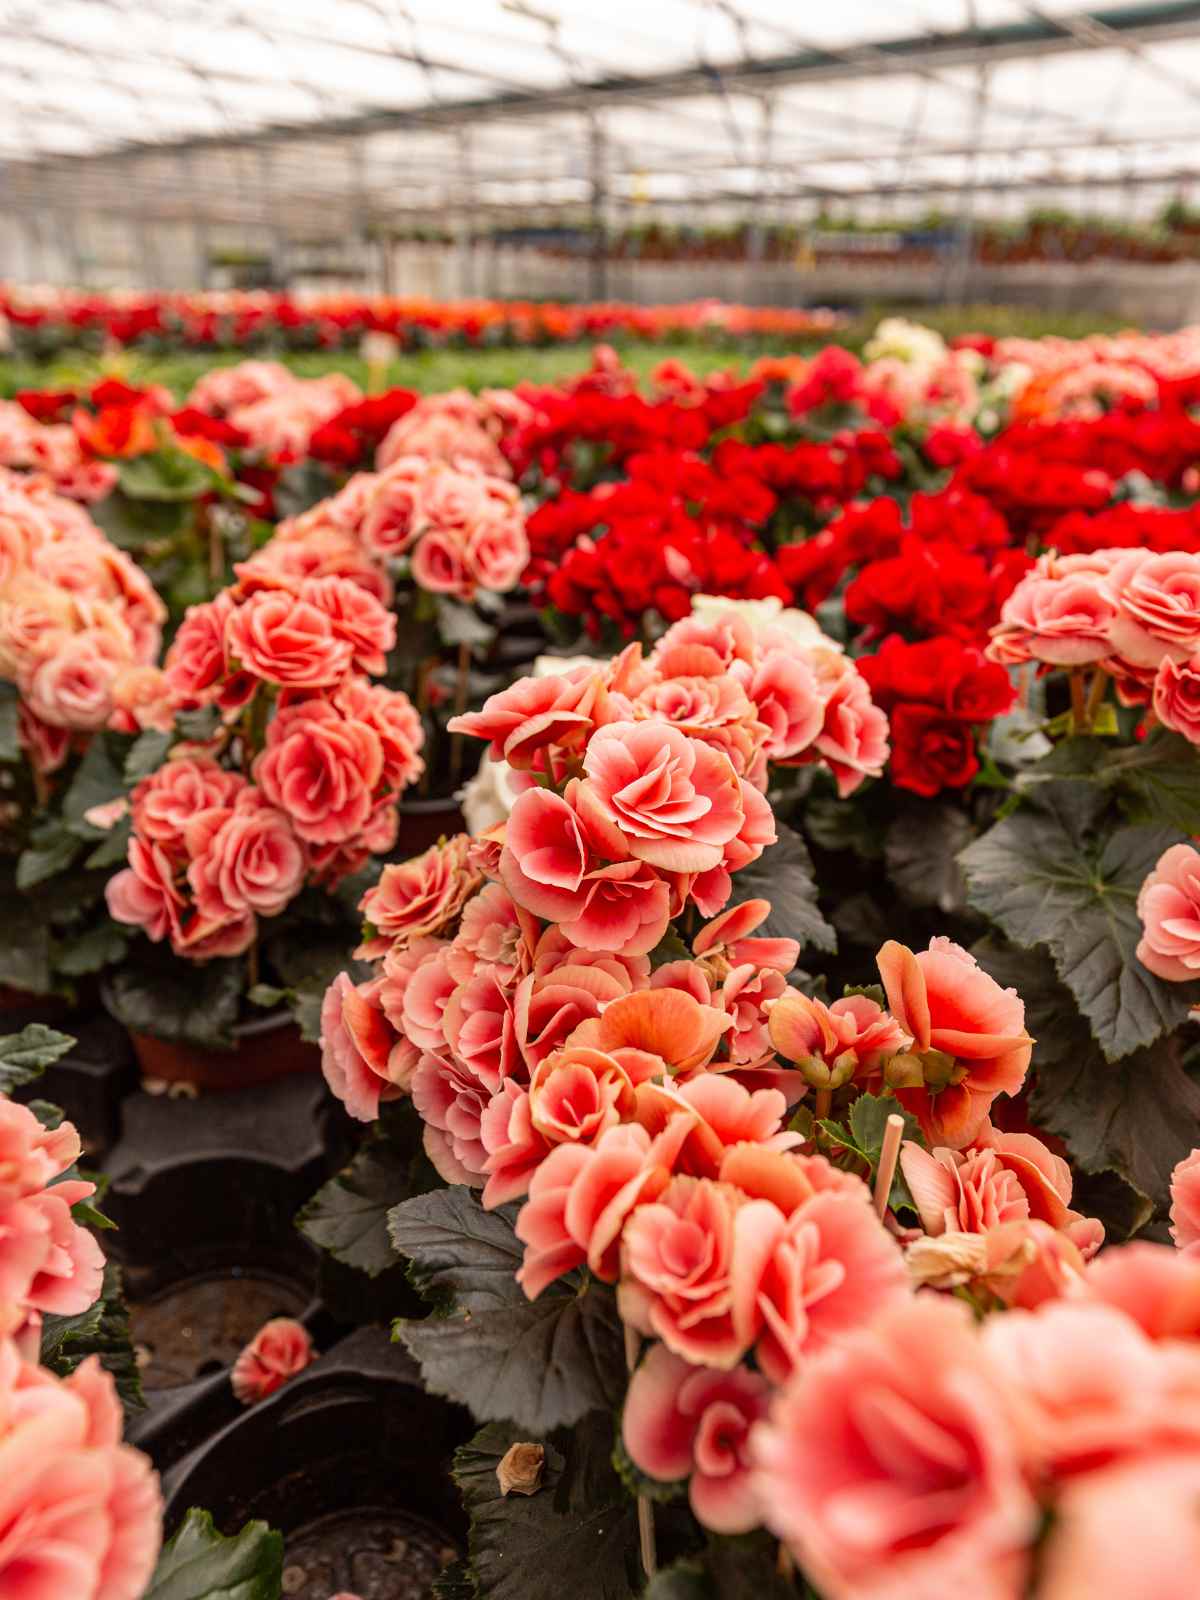 How To Grow And Care For Begonias